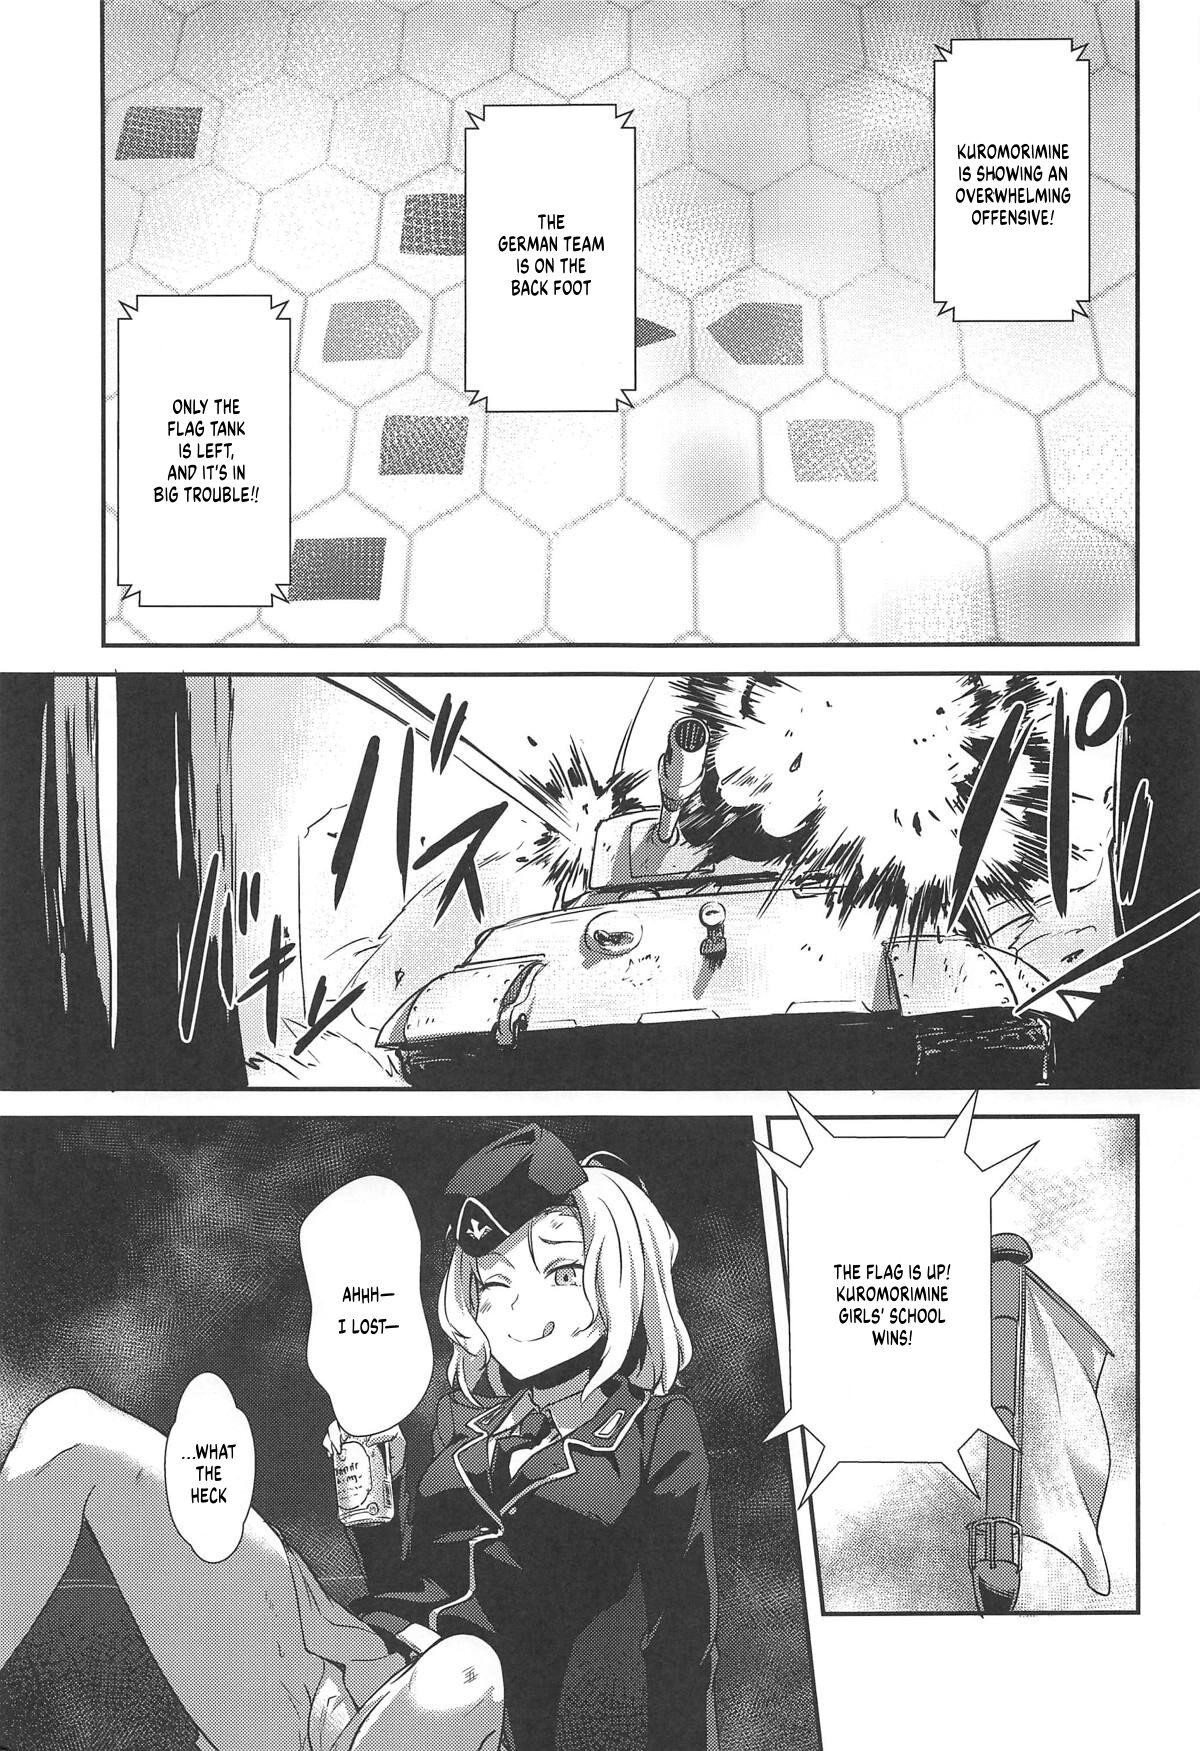 The Way How a Matriarch is Brought Up - Maho's Case, Bottom 18